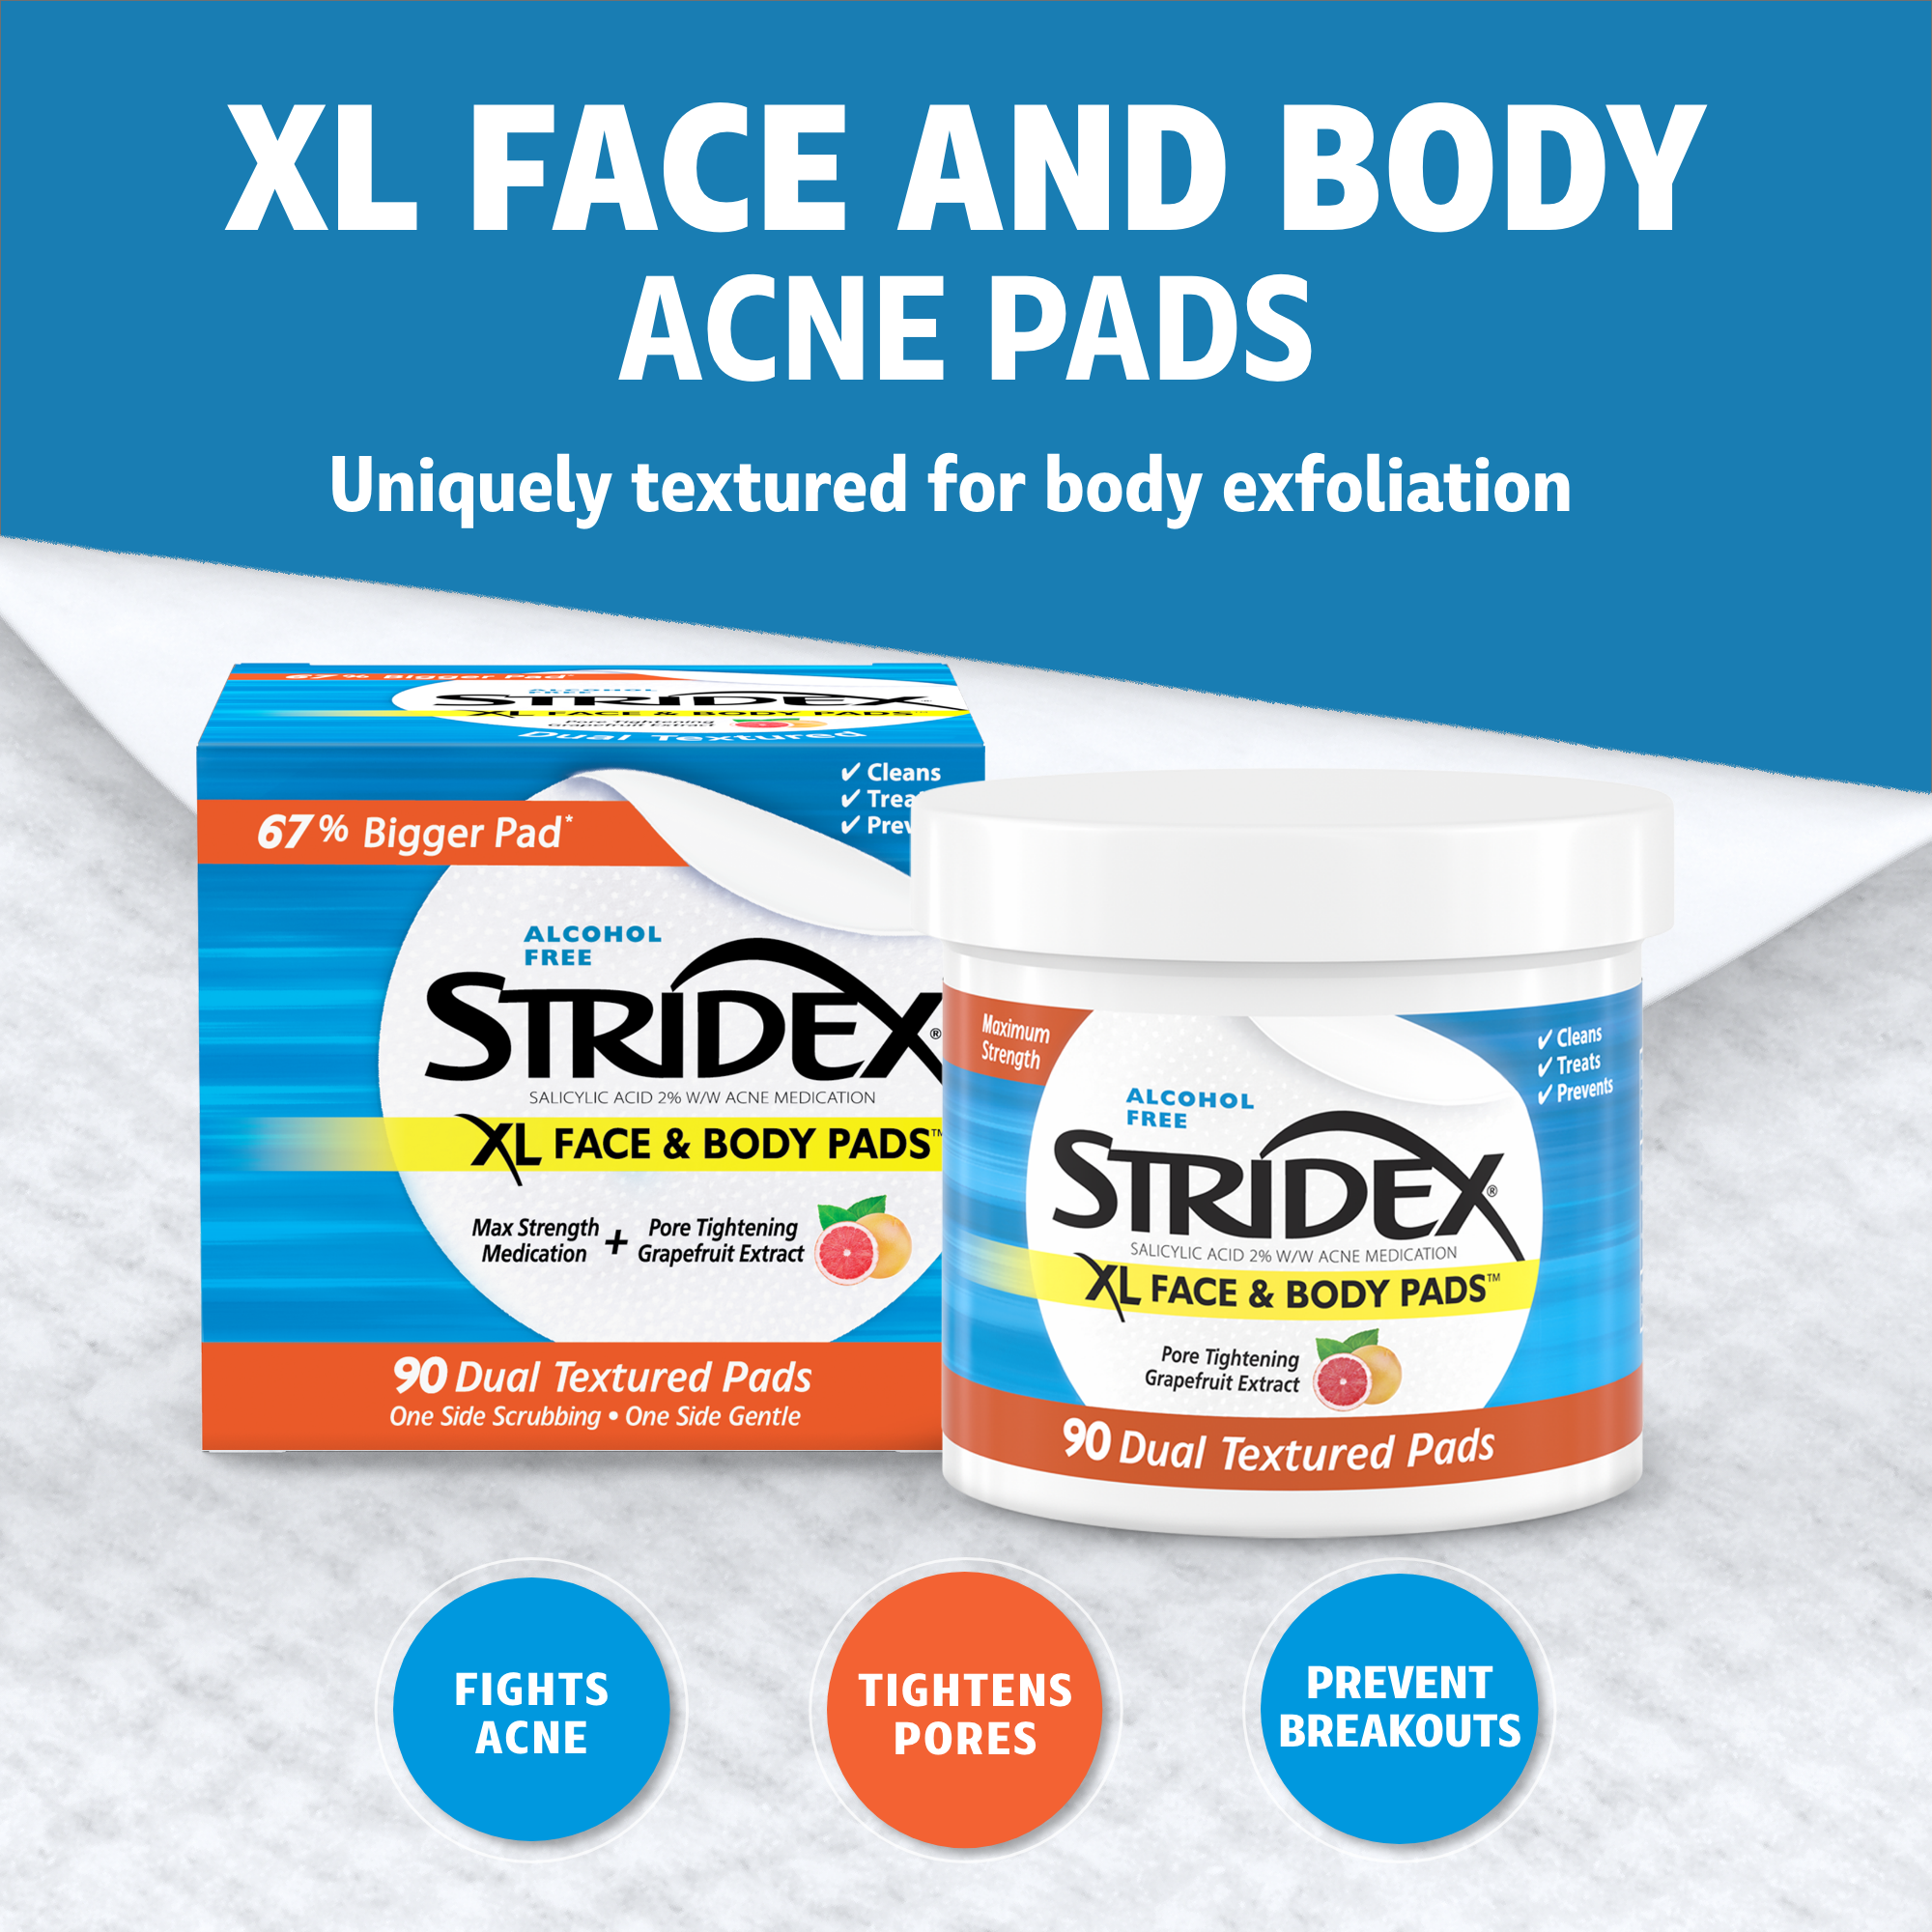 Stridex XL Acne Pads for Face and Body with Salicylic Acid, Alcohol Free, 90 Ct - image 4 of 12